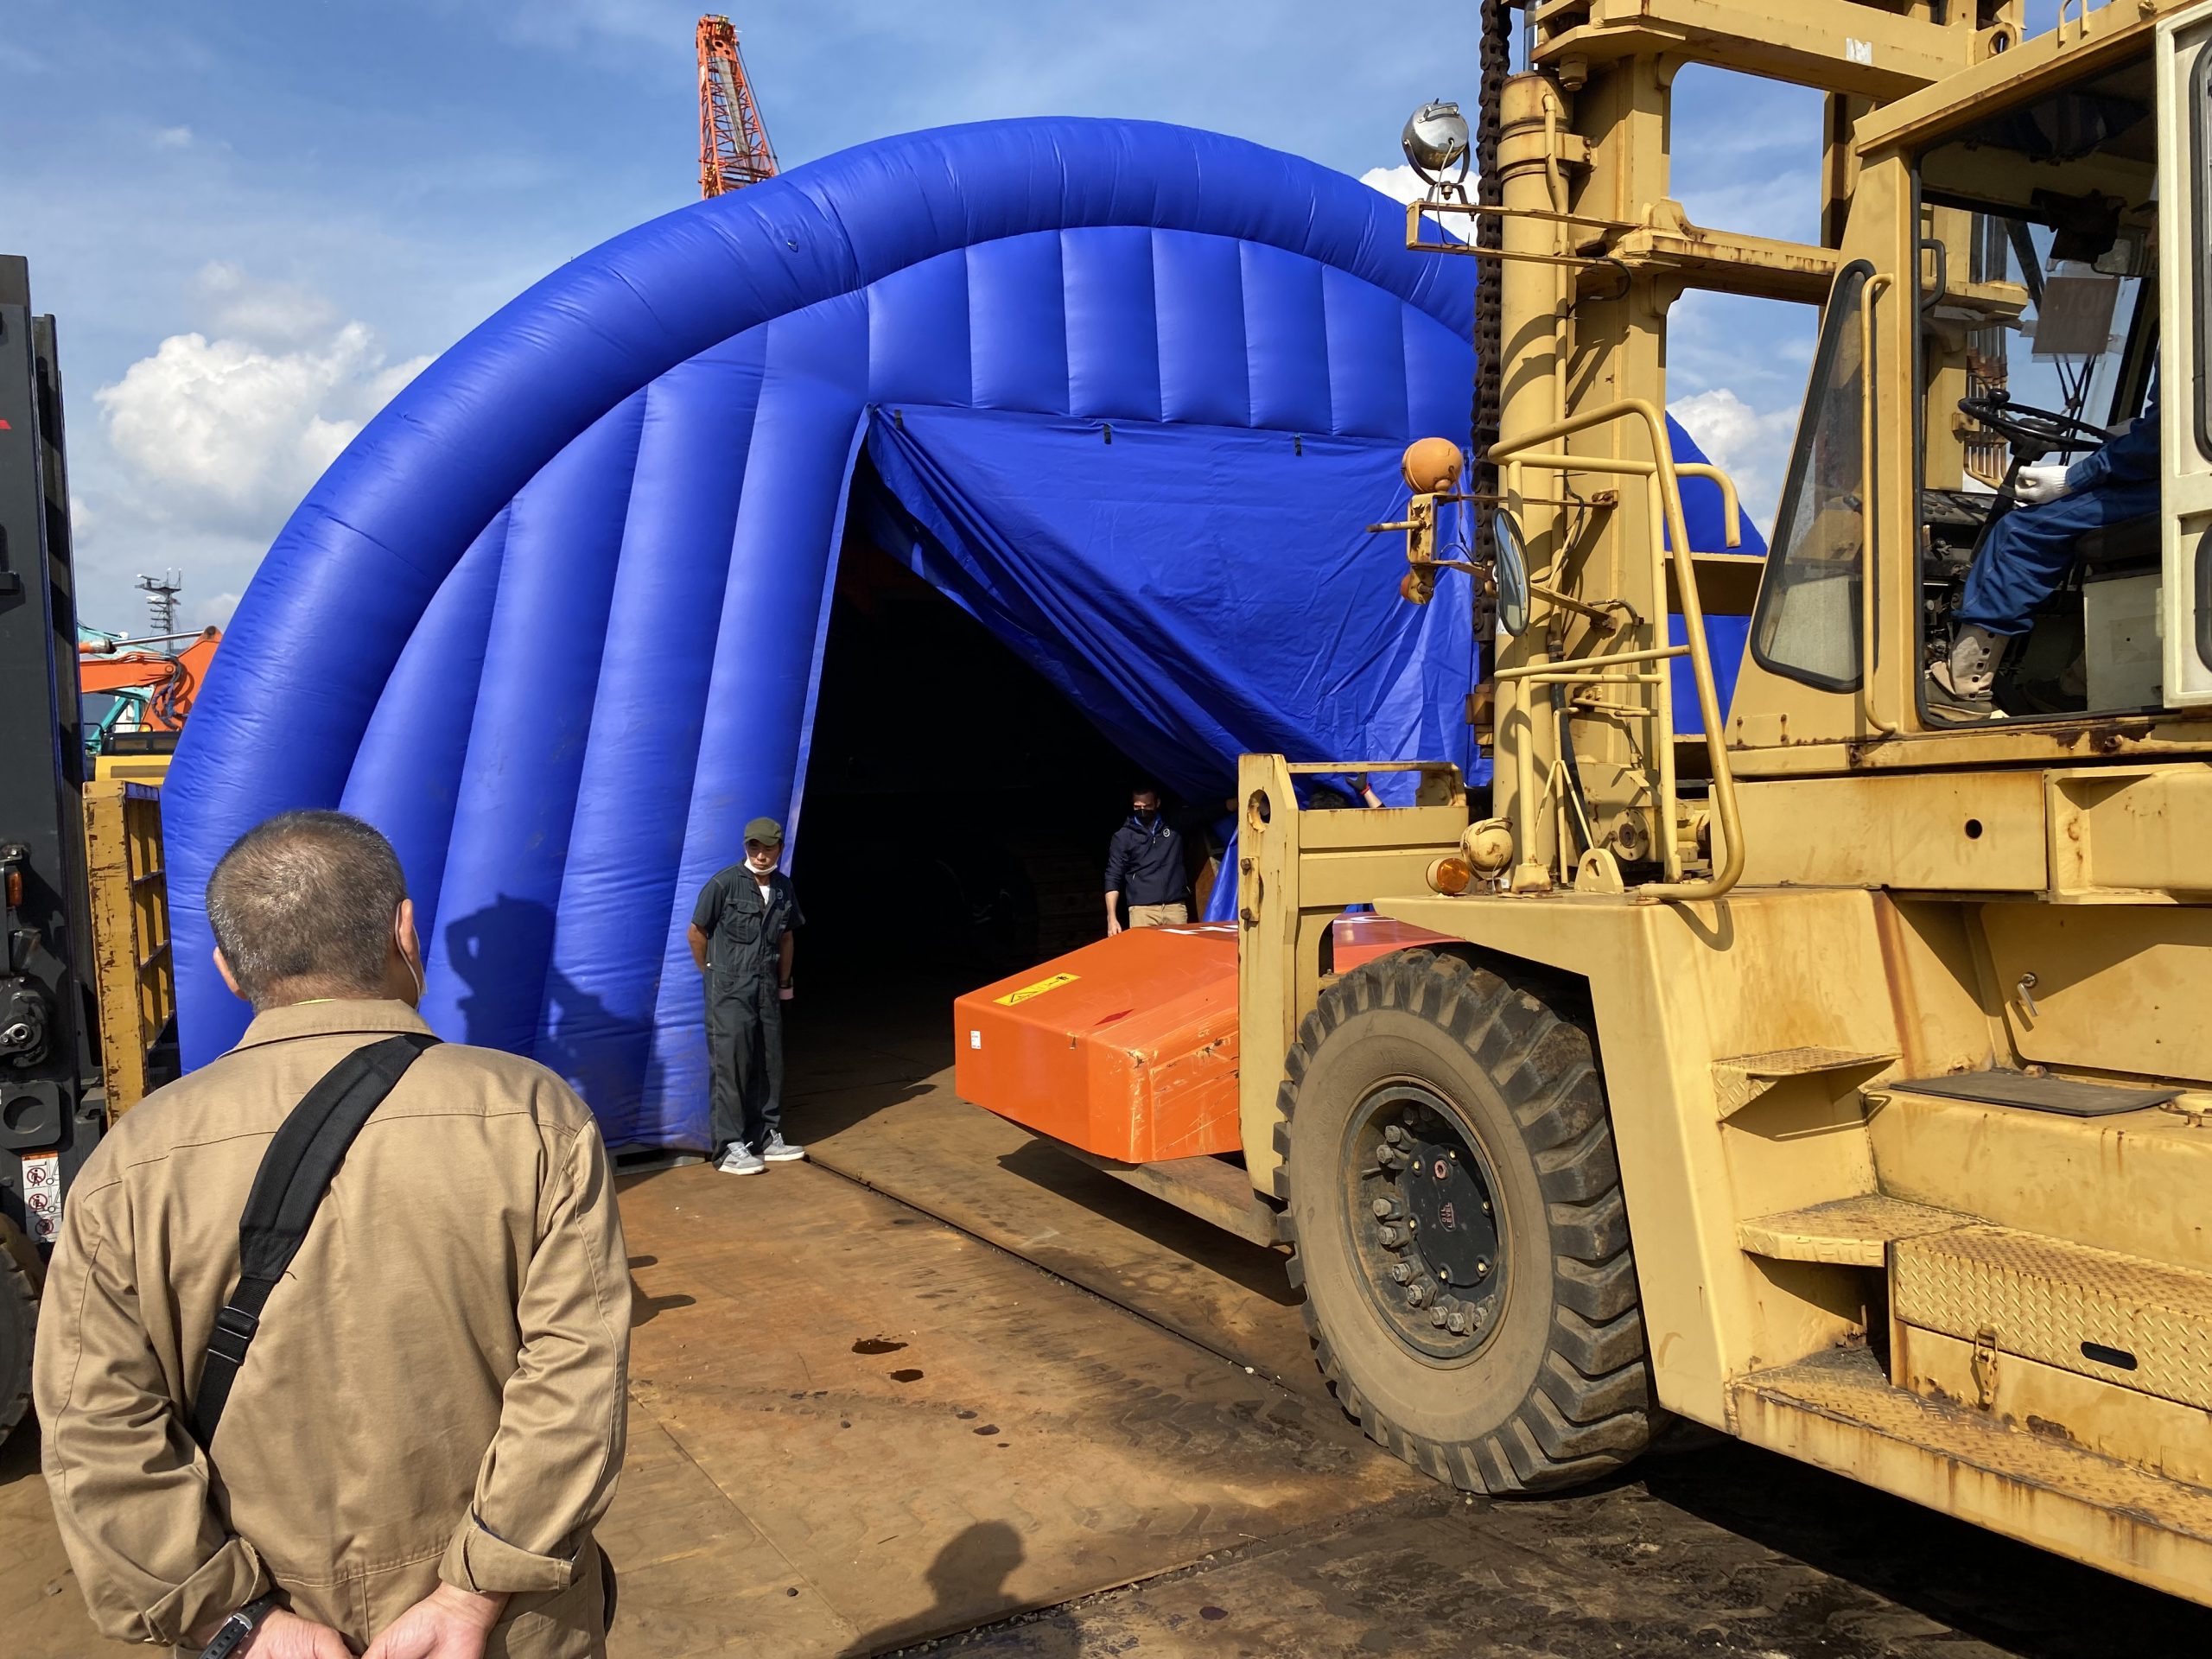 At hello forklift is carrying a bright orange piece of an Hitatchi ZX870 excavator into a bright blue fumigation tent. Two men dressed in boiler suits stand by the entrance to the tent. There is another man in the foreground in a tan long-sleeved shirt with black bag strap across his body. The sky is blue with a few white clouds. There are orange cranes in the background.